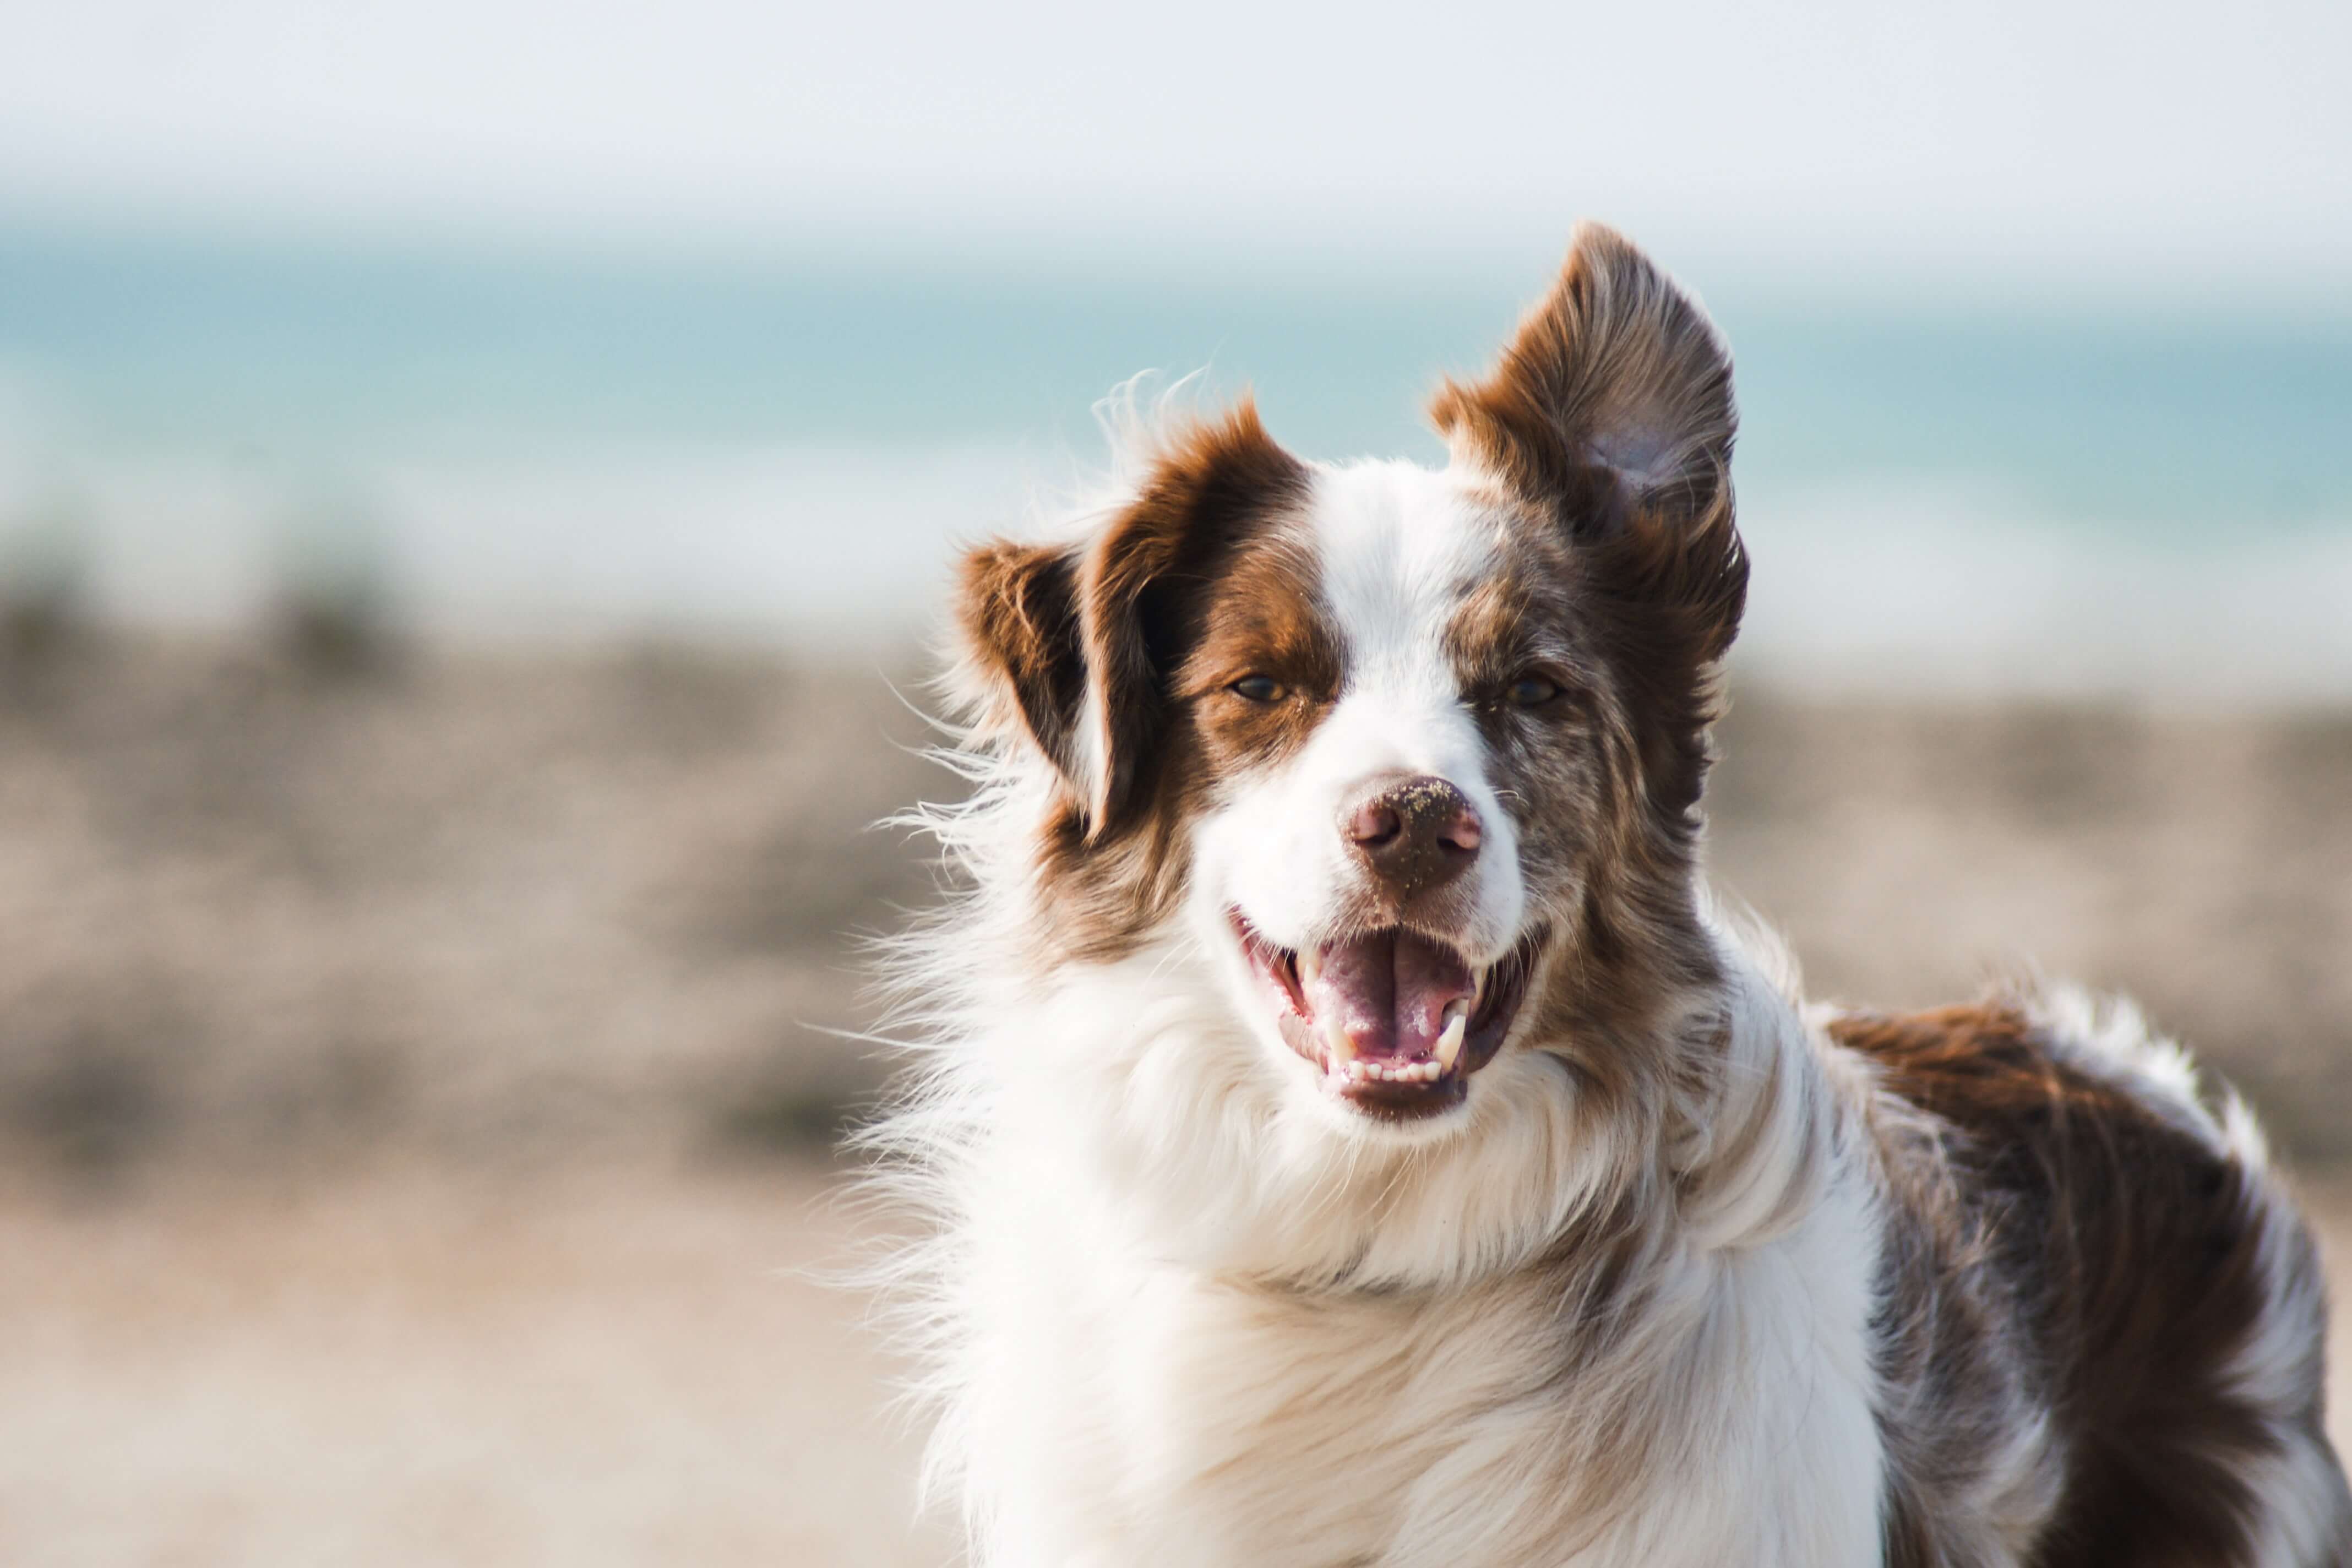 5 Ways to Keep Your Dog's Joints in Good Condition